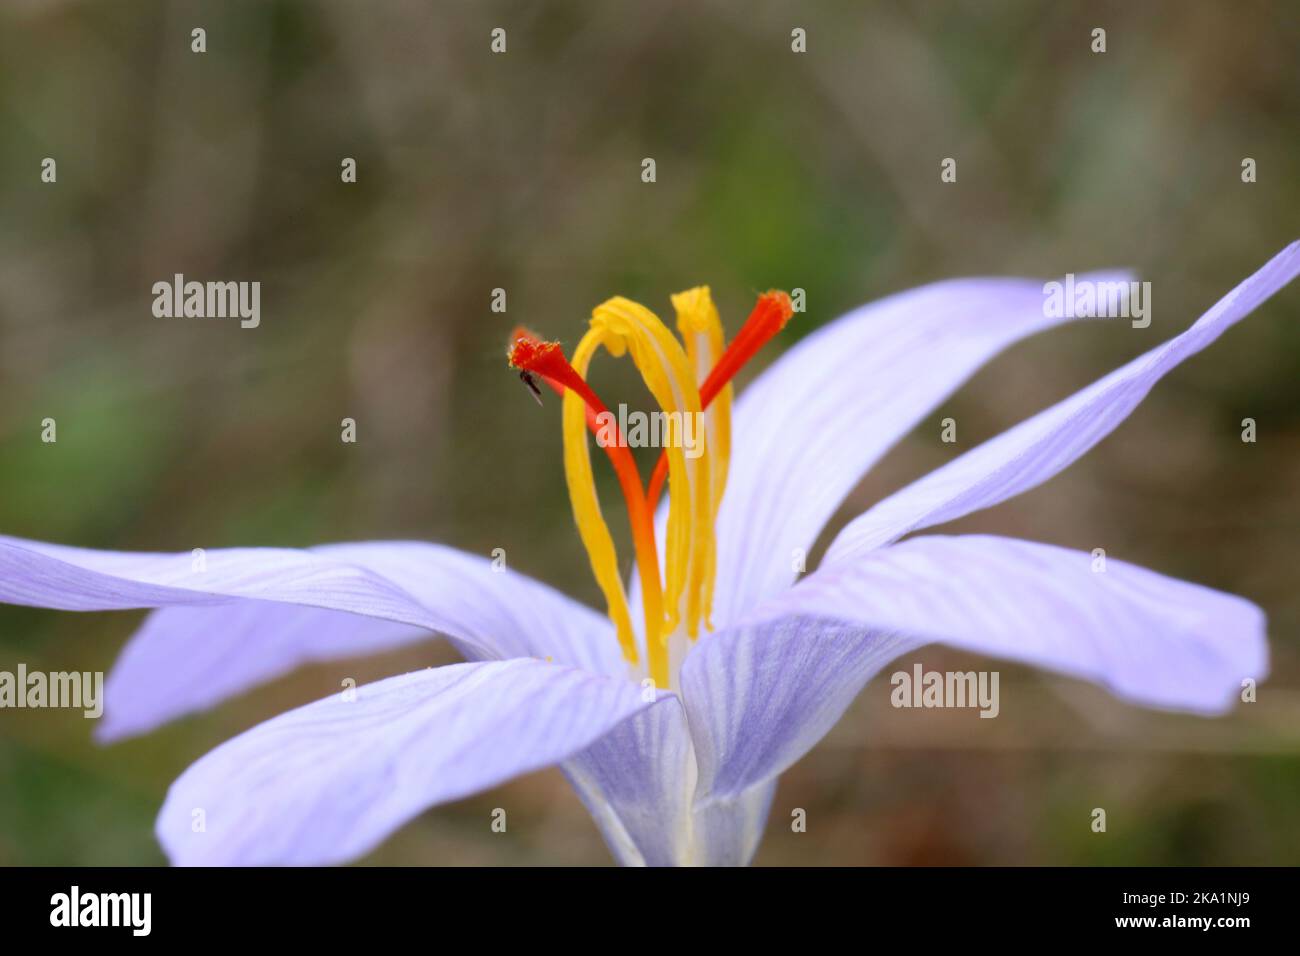 Crocus pallasii, Iridaceae. A wild plant shot in the fall. Stock Photo